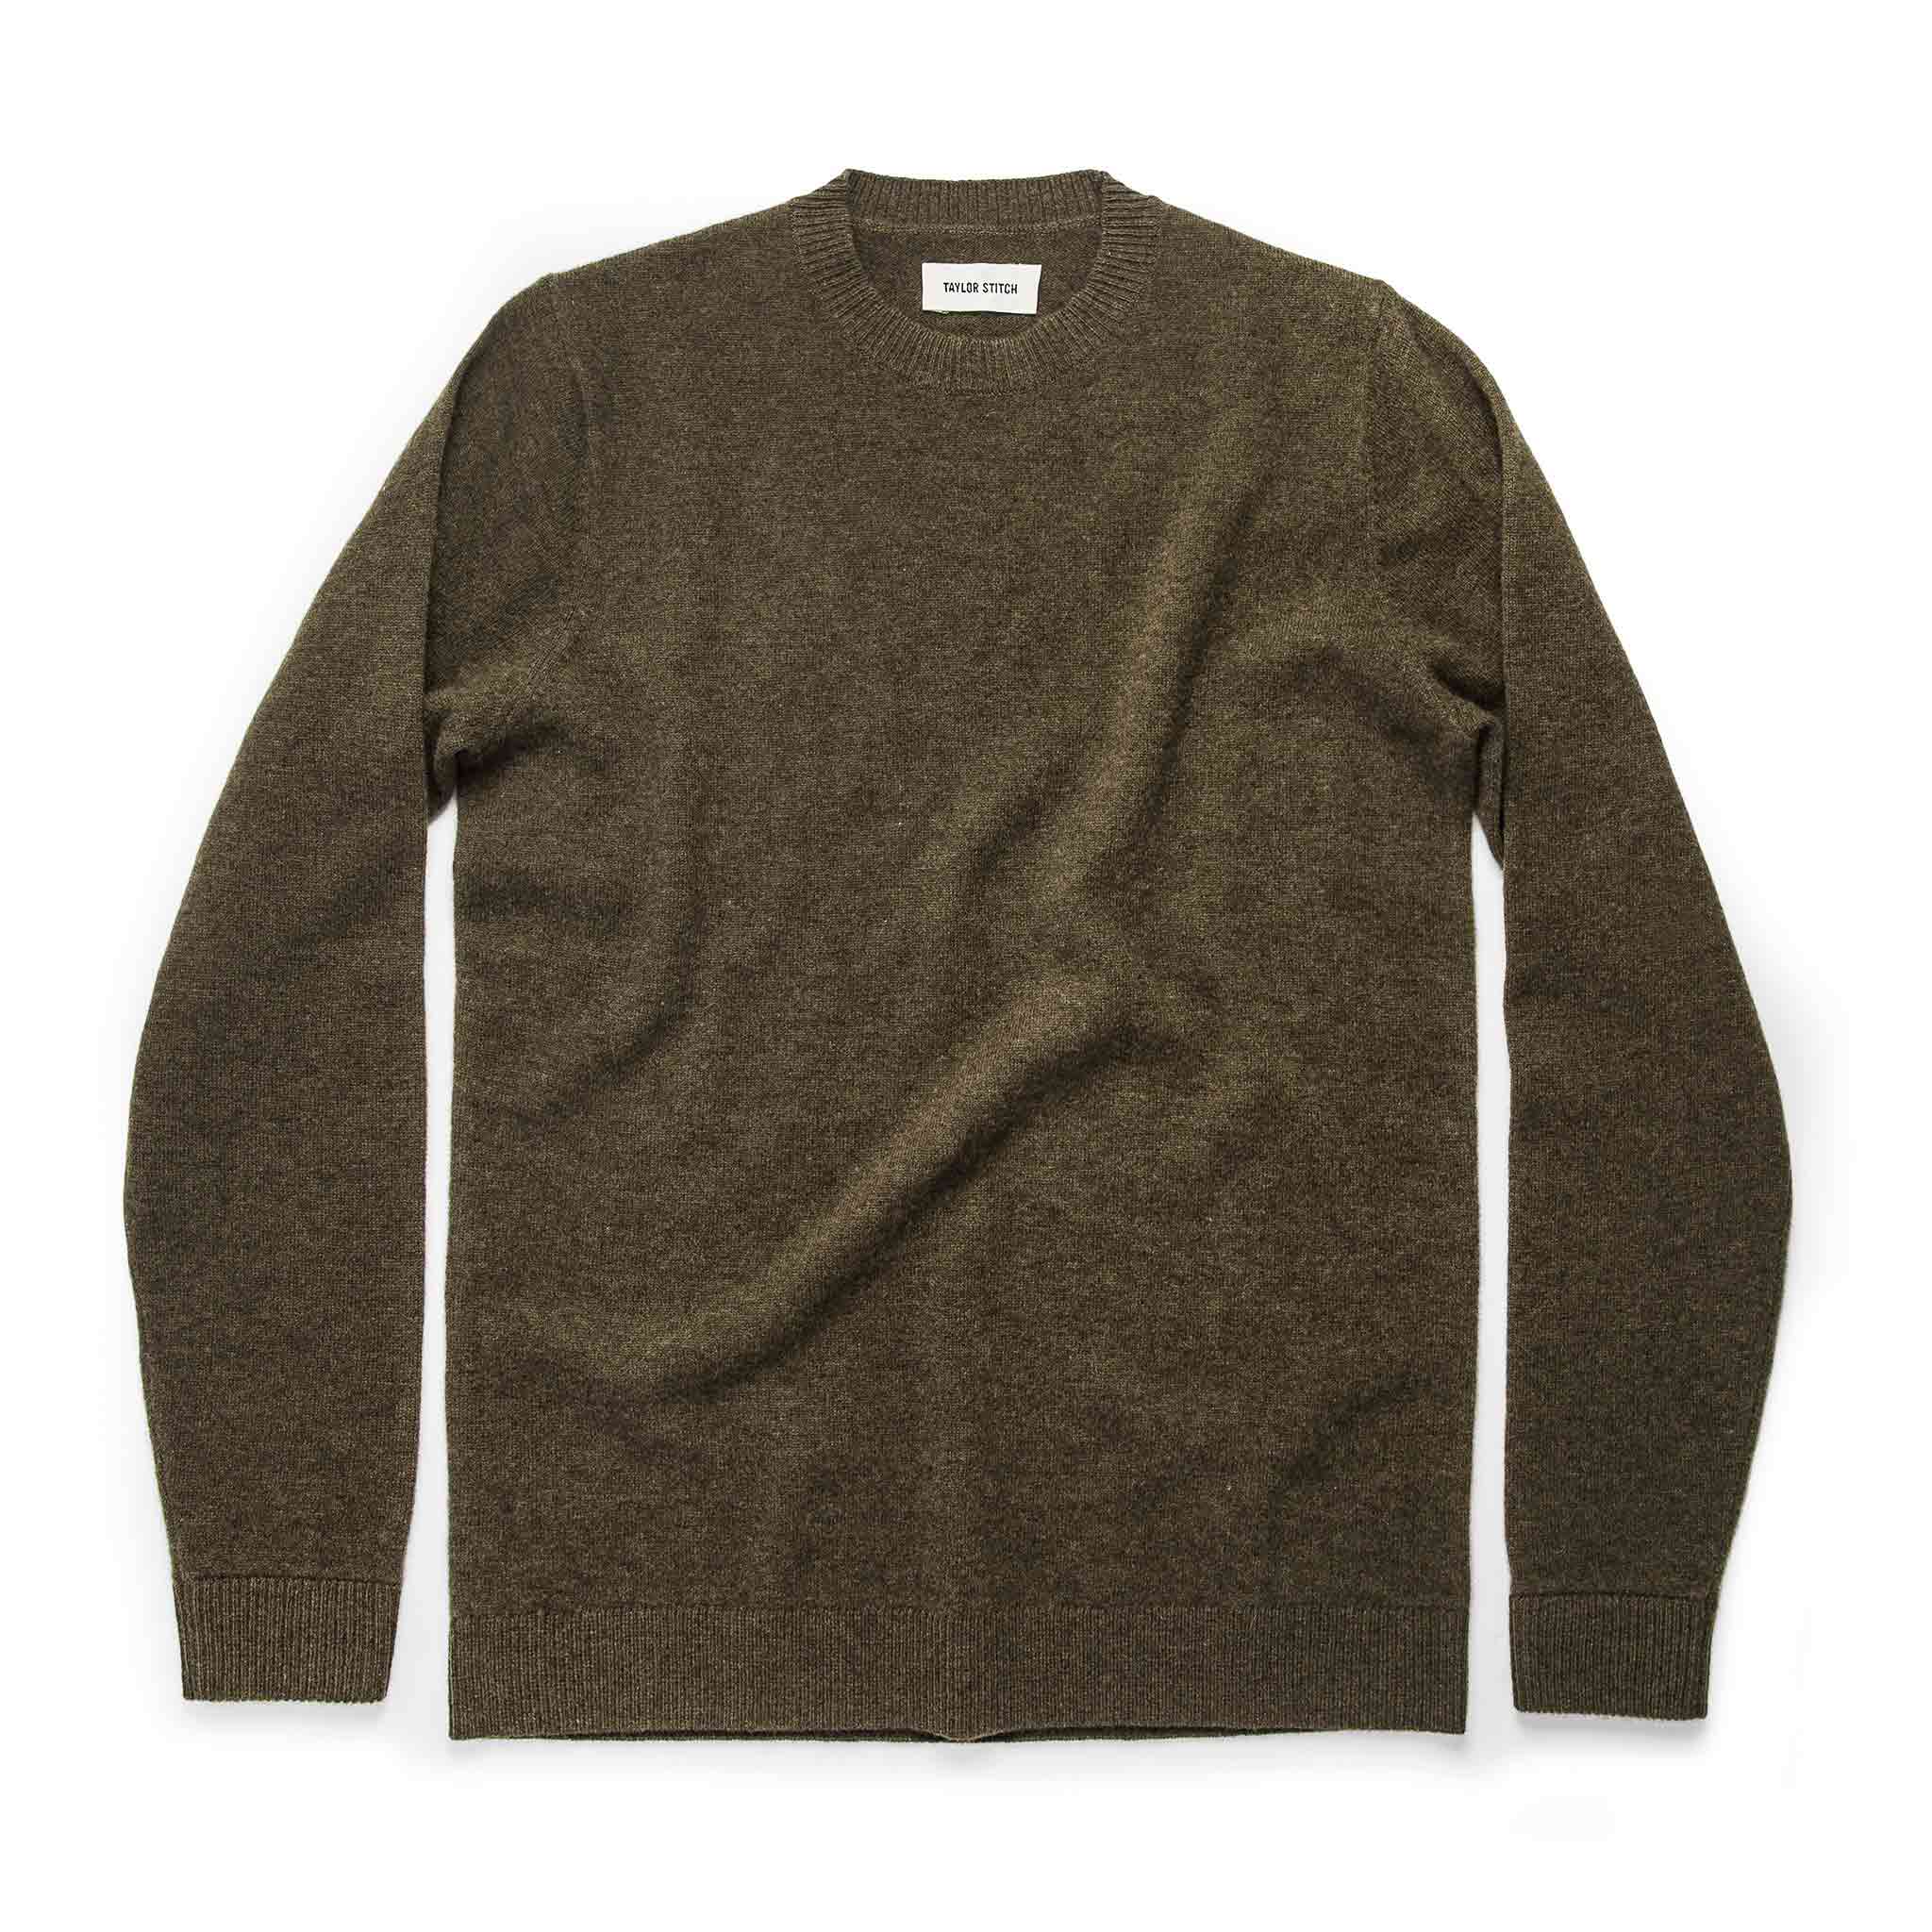 The Lodge Sweater in Army | Taylor Stitch - Classic Men’s Clothing